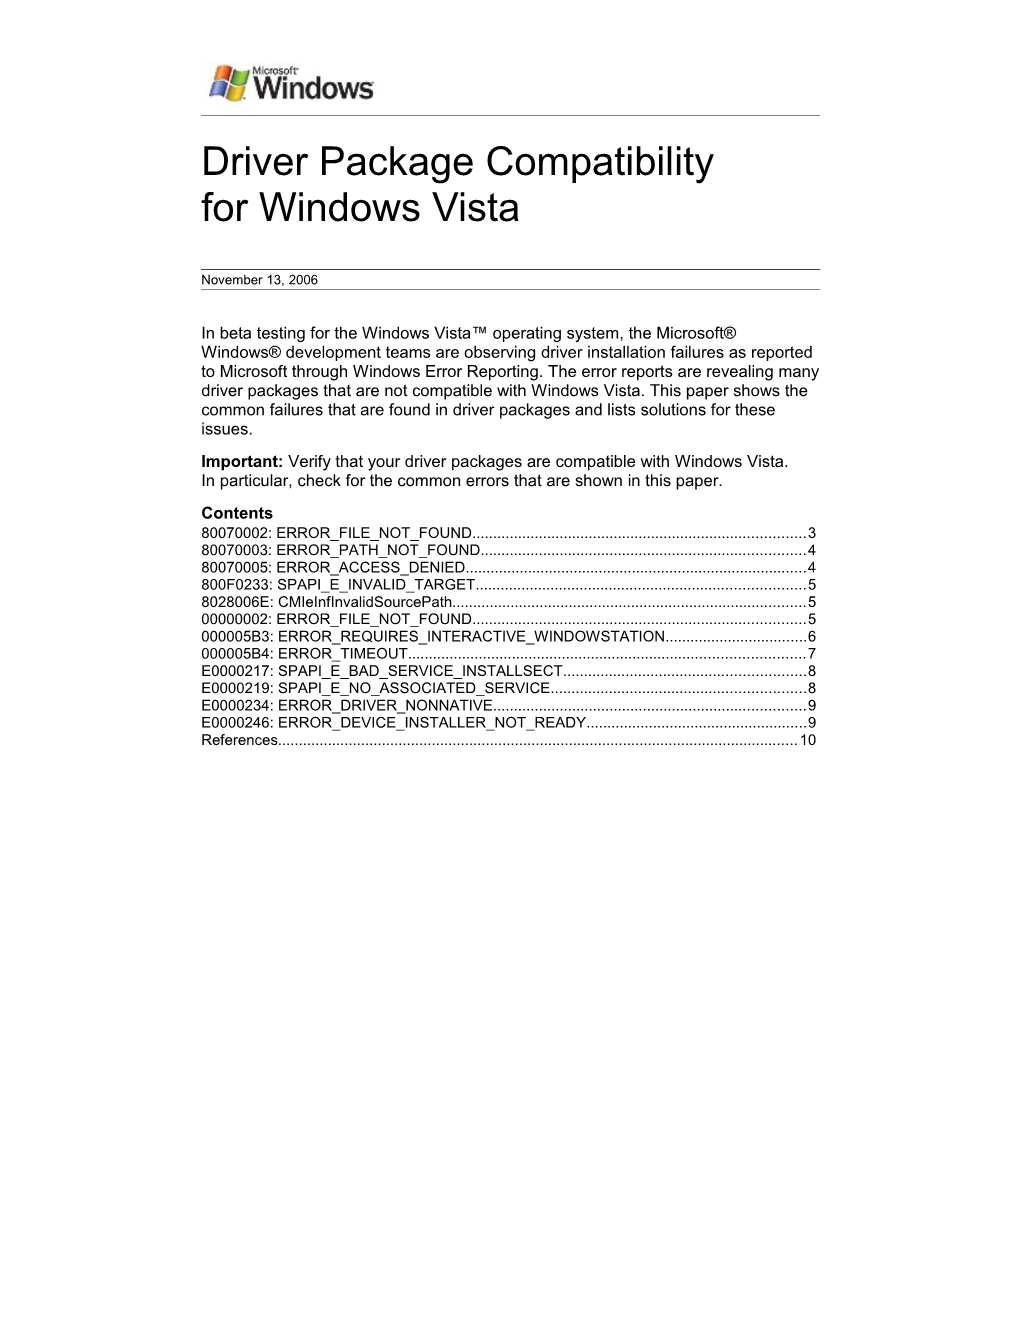 Driver Package Compatibility for Windows Vista